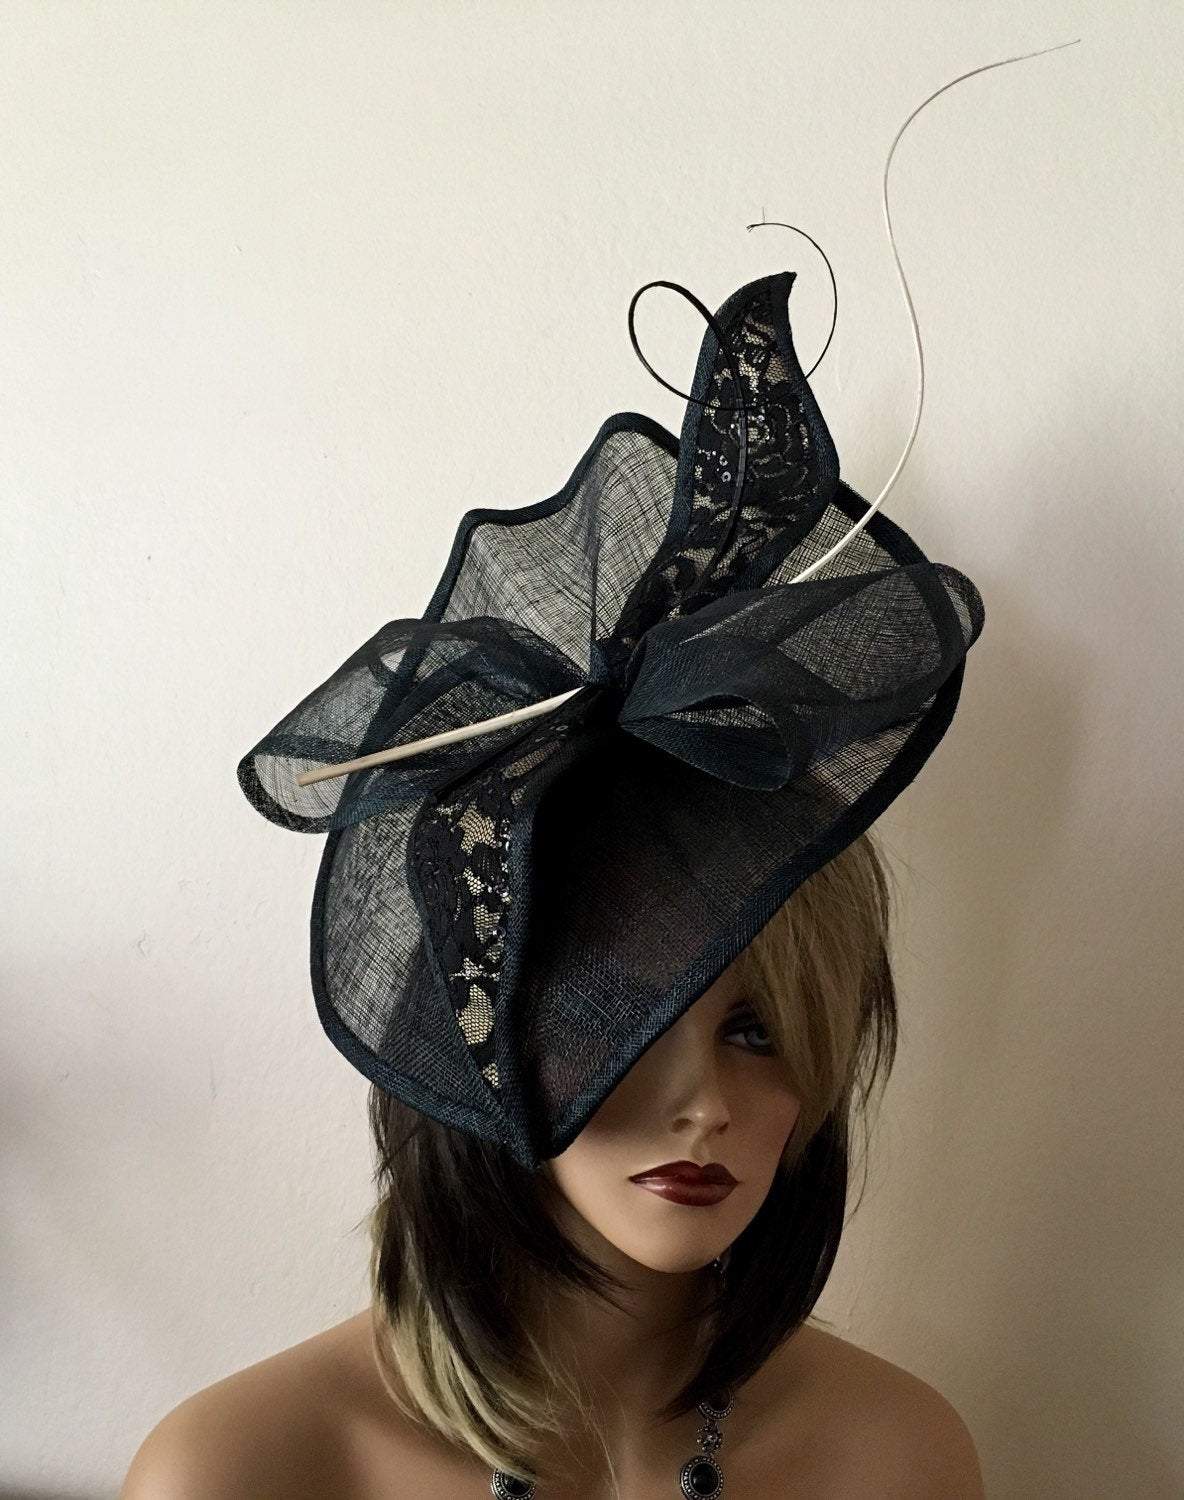 Black and  beige fascinator. Kentucky Derby hat. Black hat for Royal Ascot, wedding. Couture hat